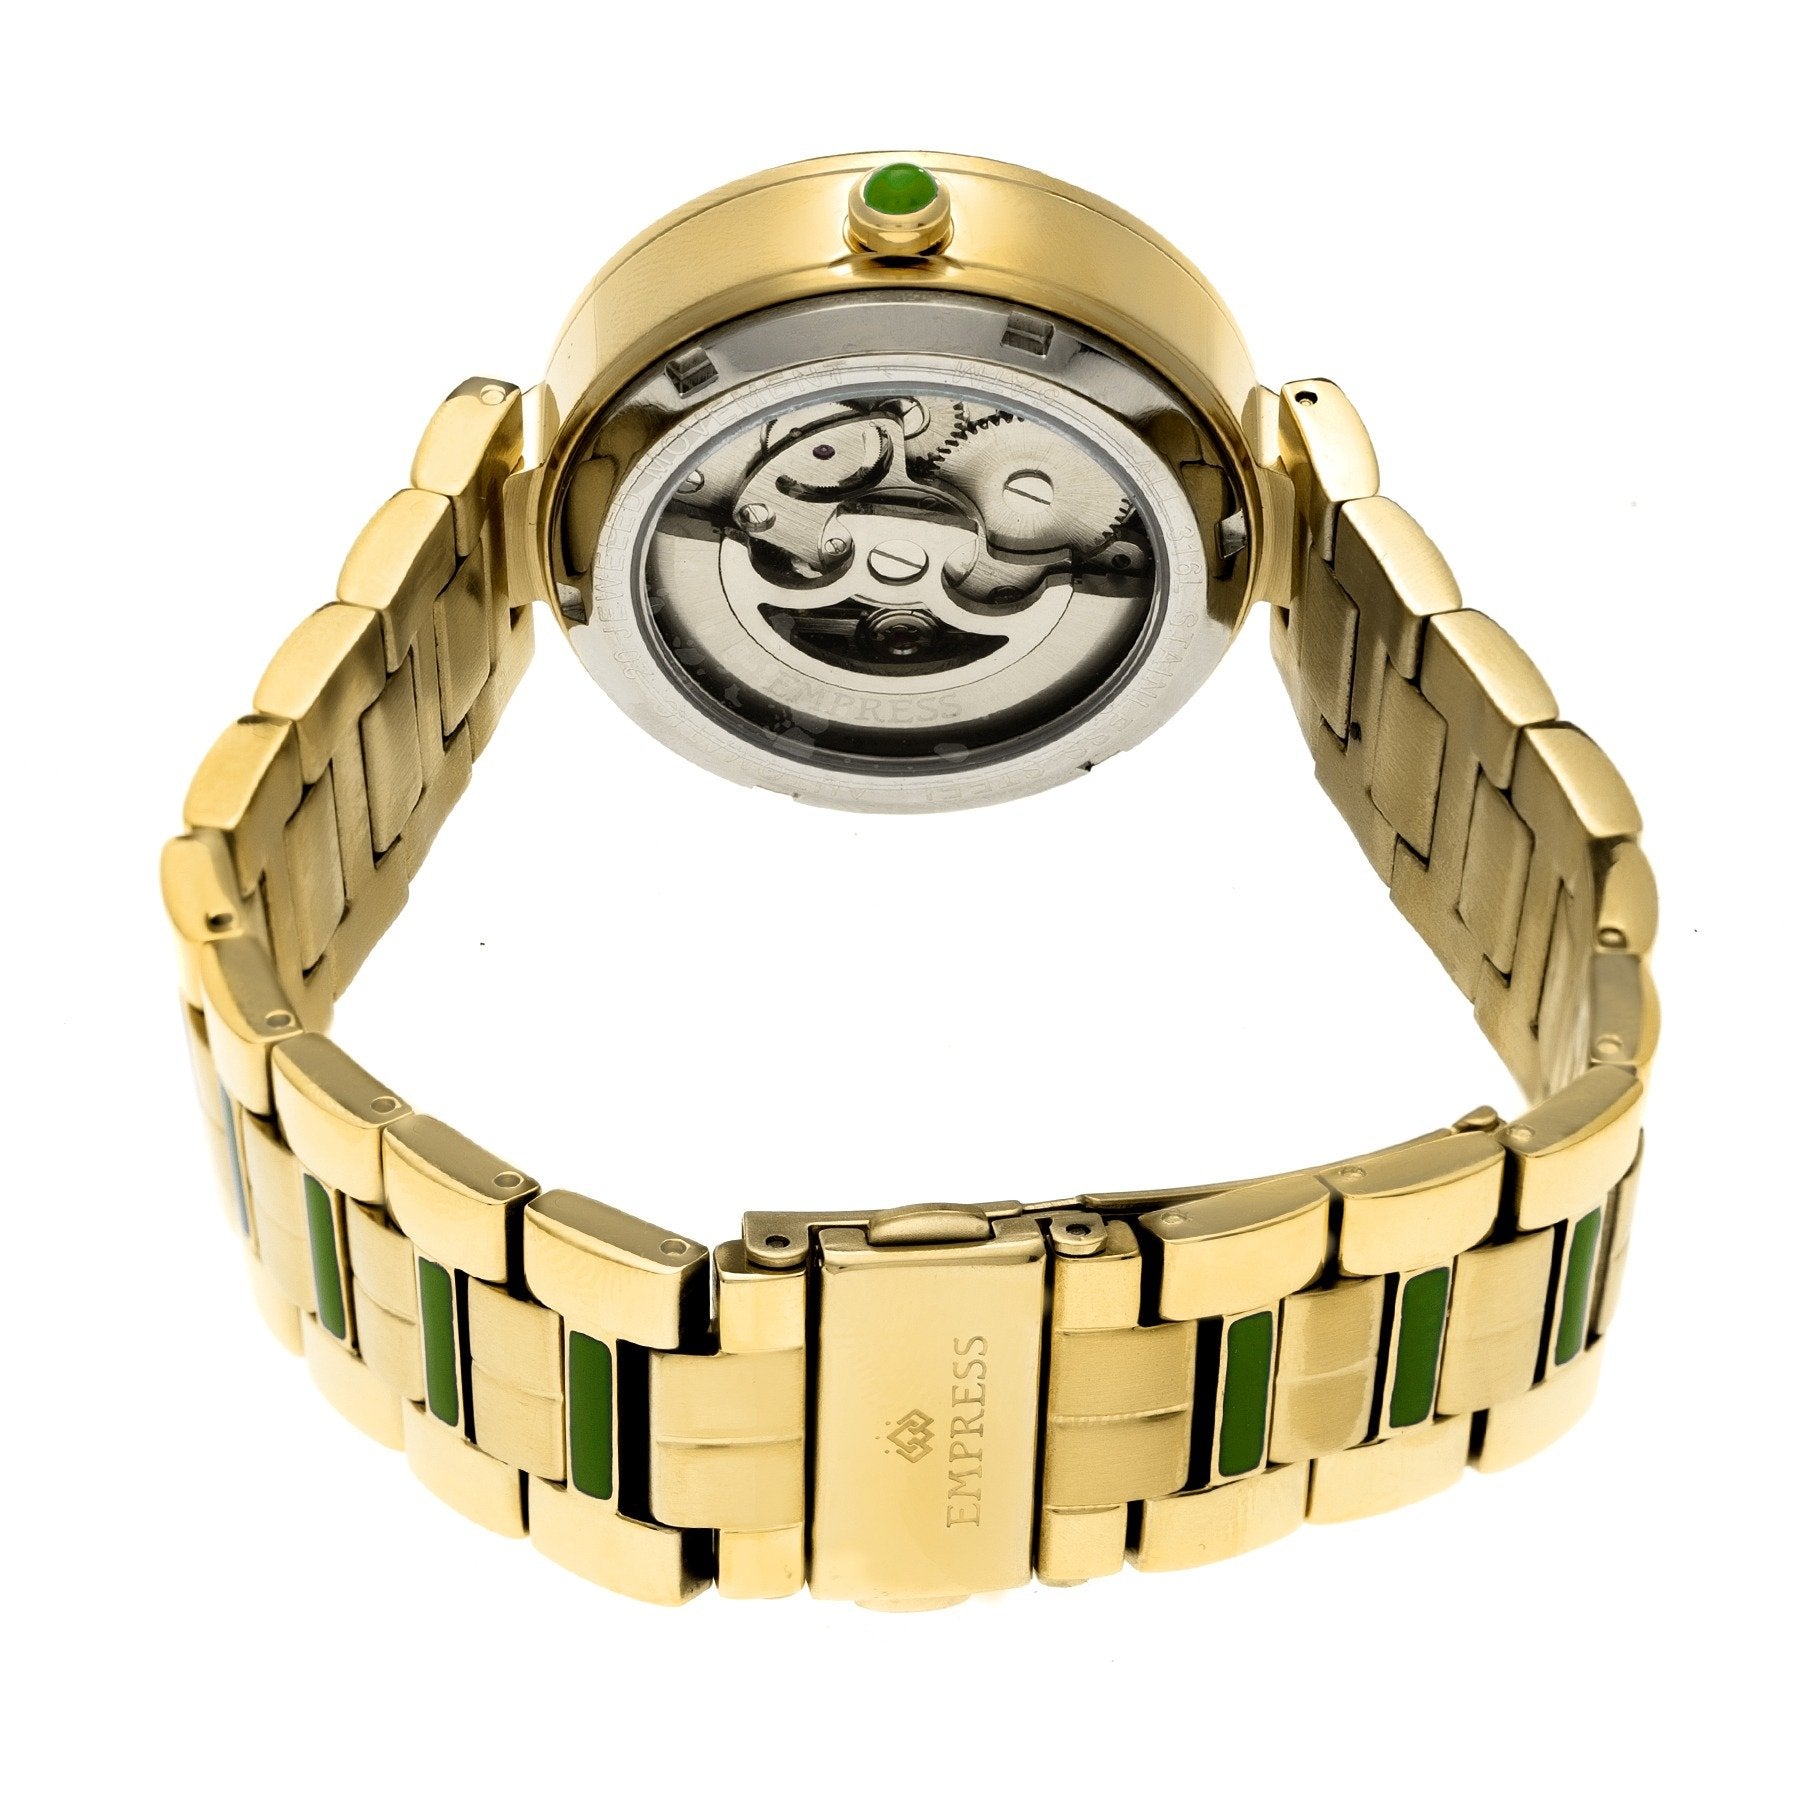 Empress Catherine Automatic Hammered Dial Bracelet Watch - Green - EMPEM1903